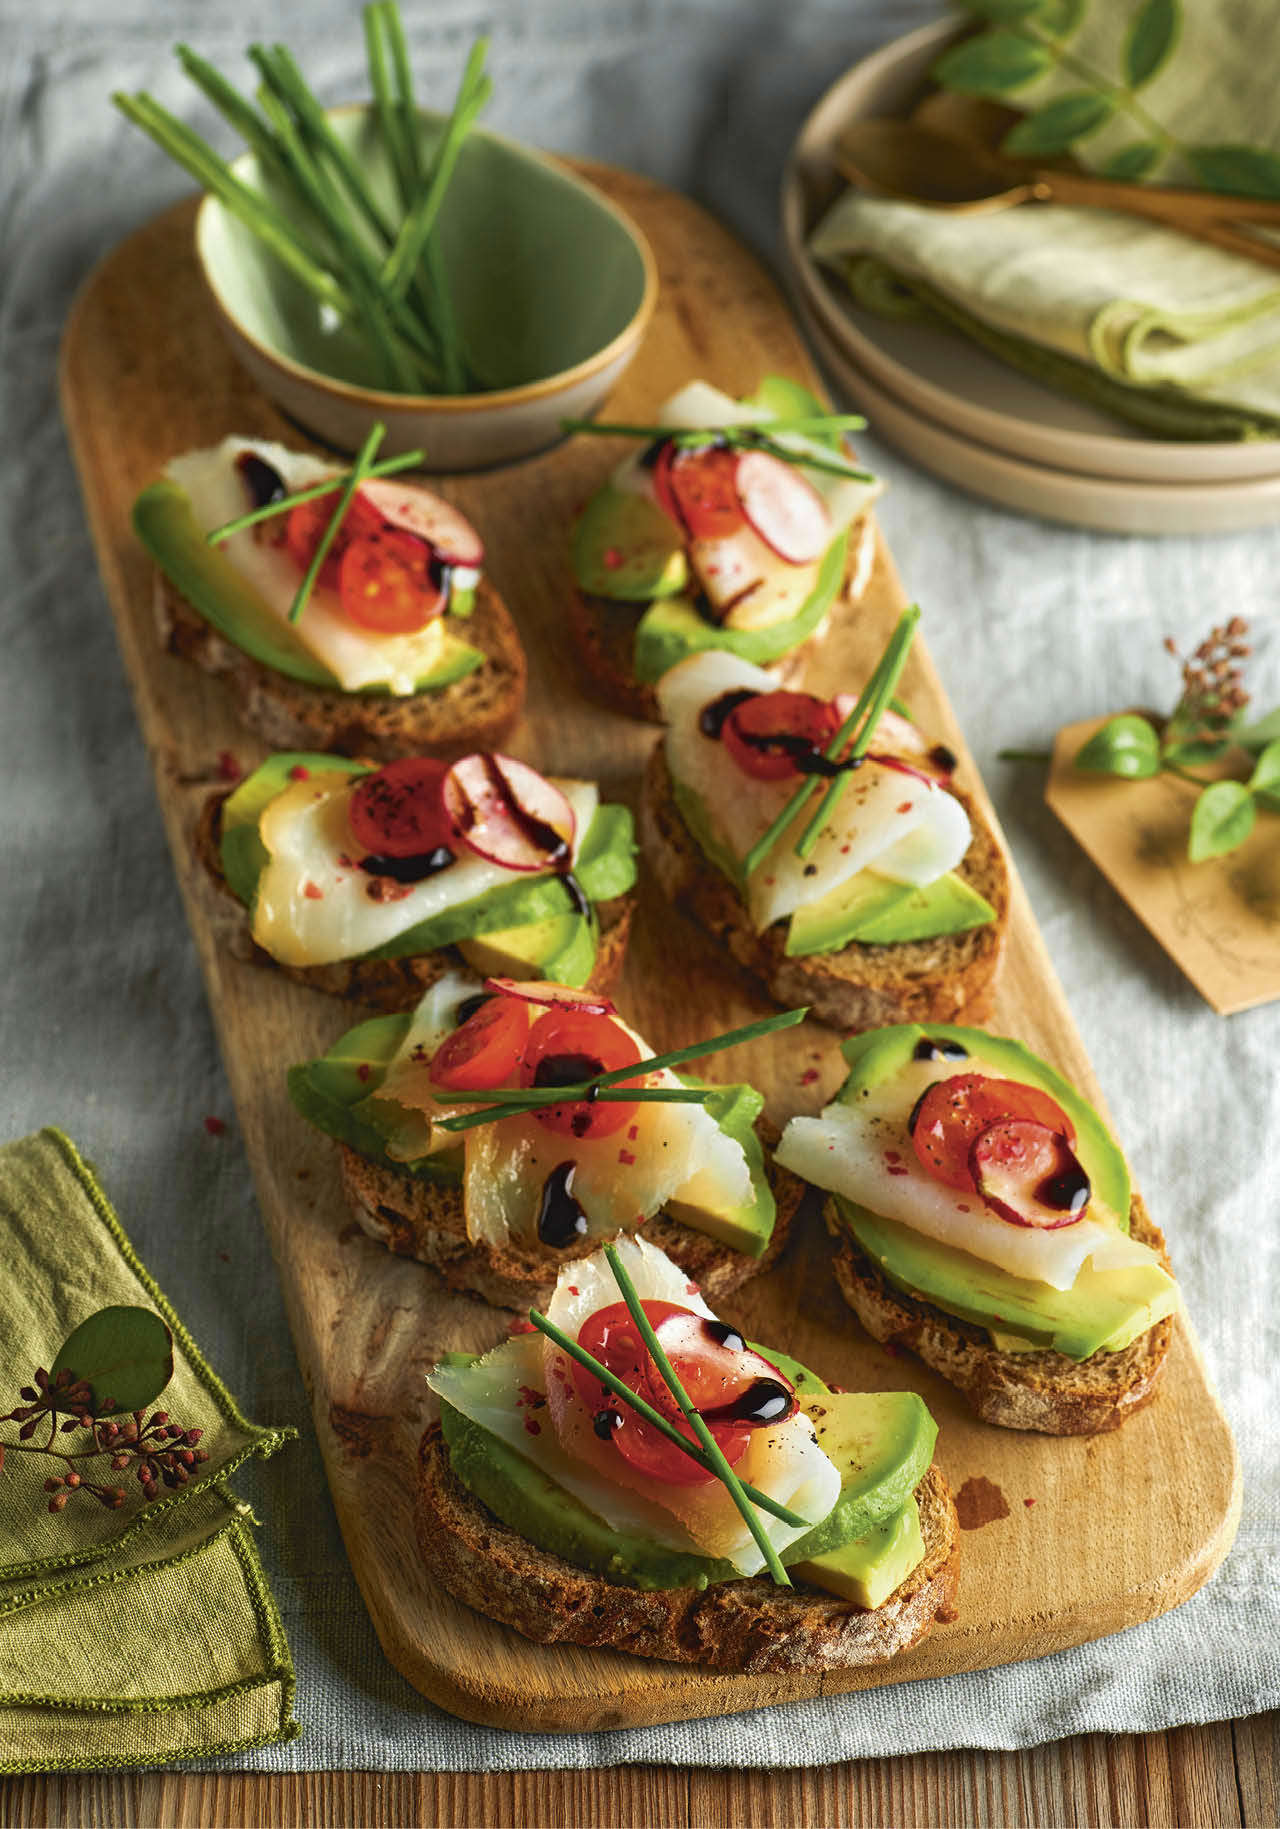 canapés con aguacate tosta aguacate bacalao